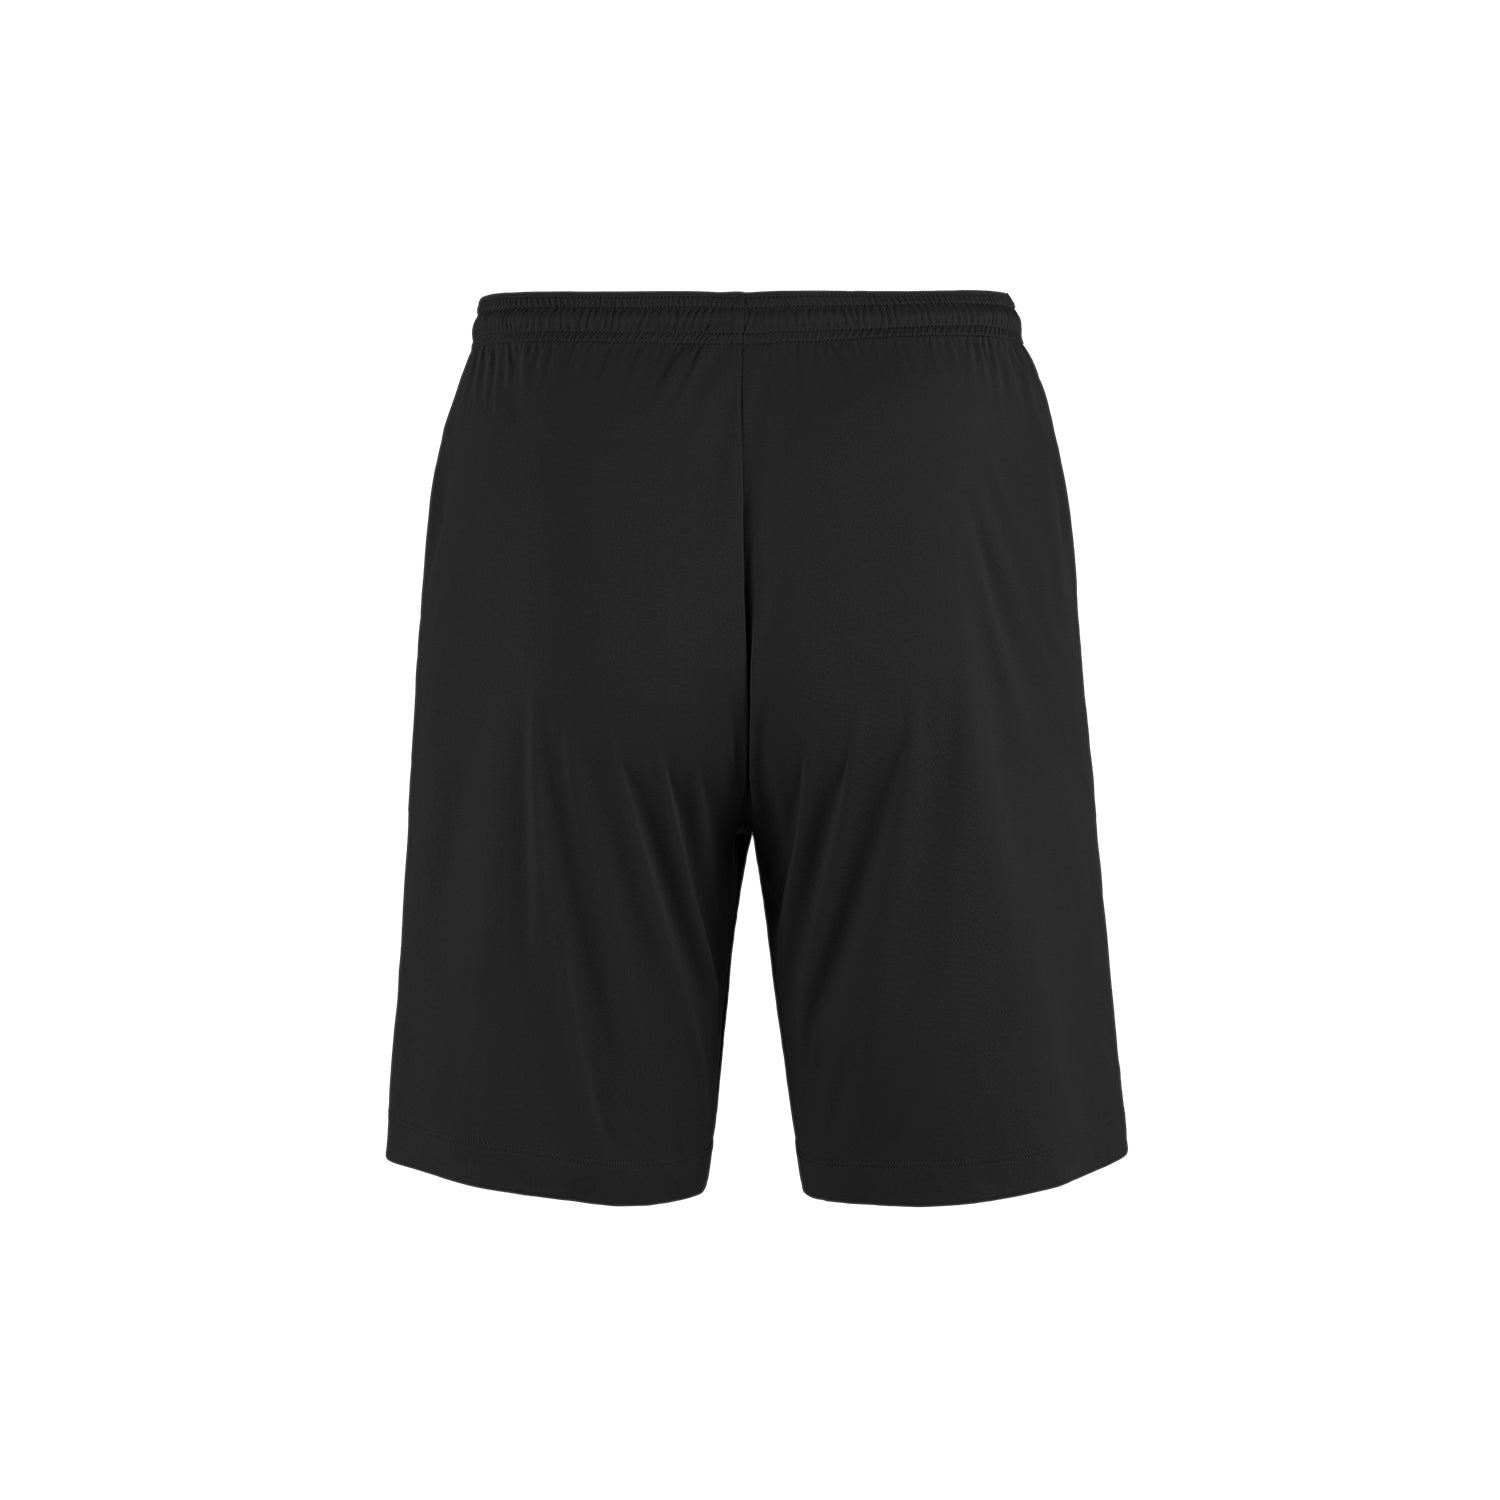 P4475Y - Wave - Youth Athletic Short with Pockets